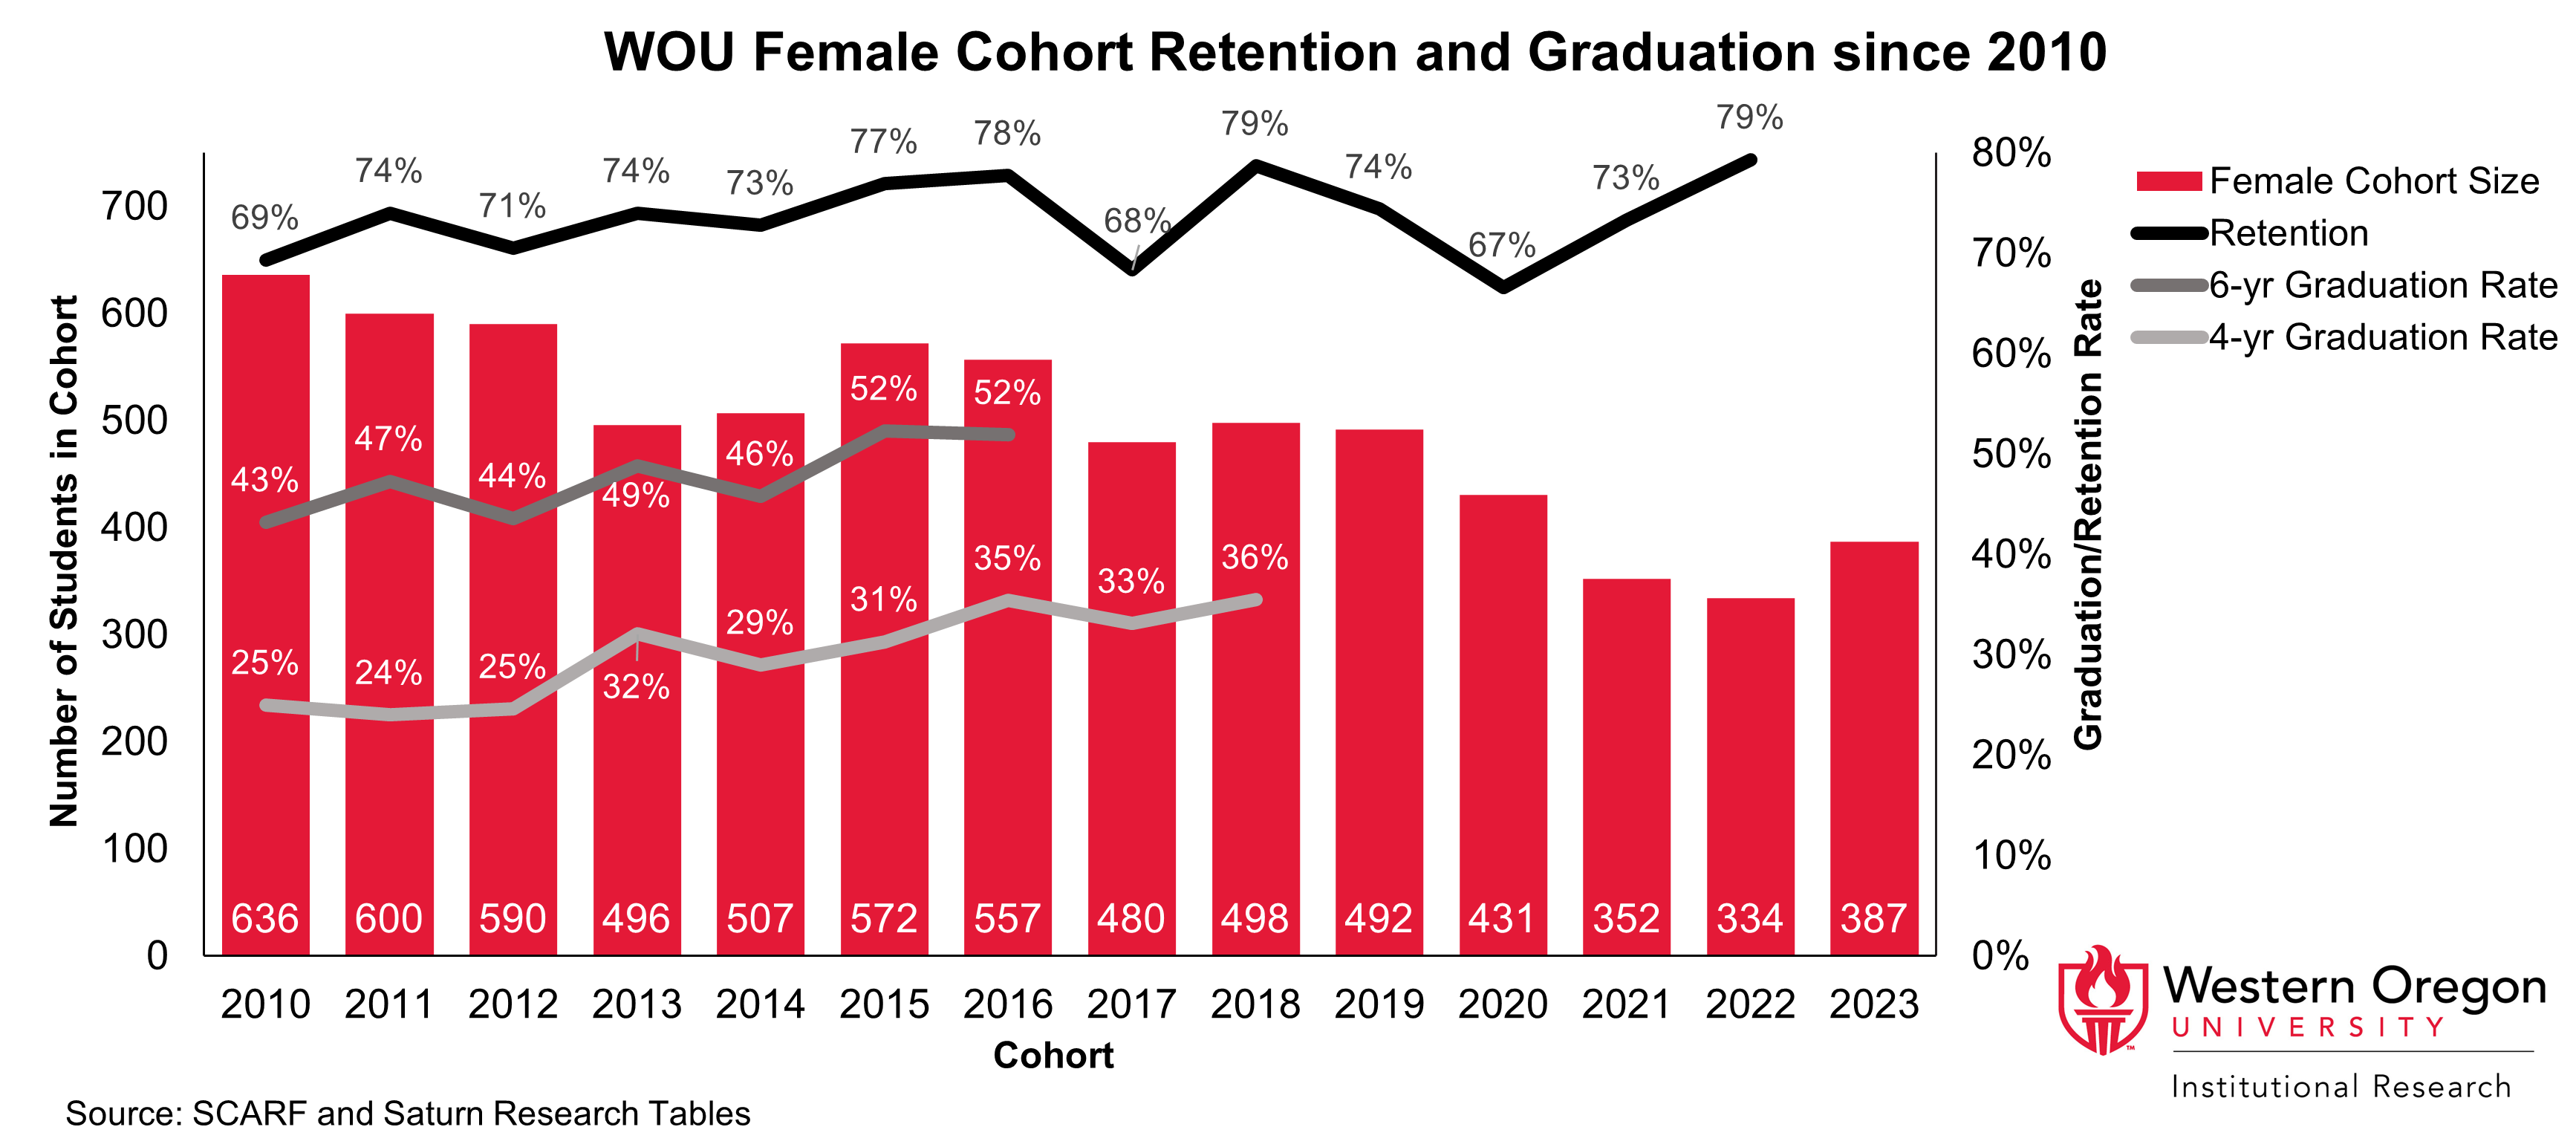 Bar and line graph of retention and 4- and 6-year graduation rates since 2010 for WOU students that are female, showing that graduation and retention rates have increased overall.